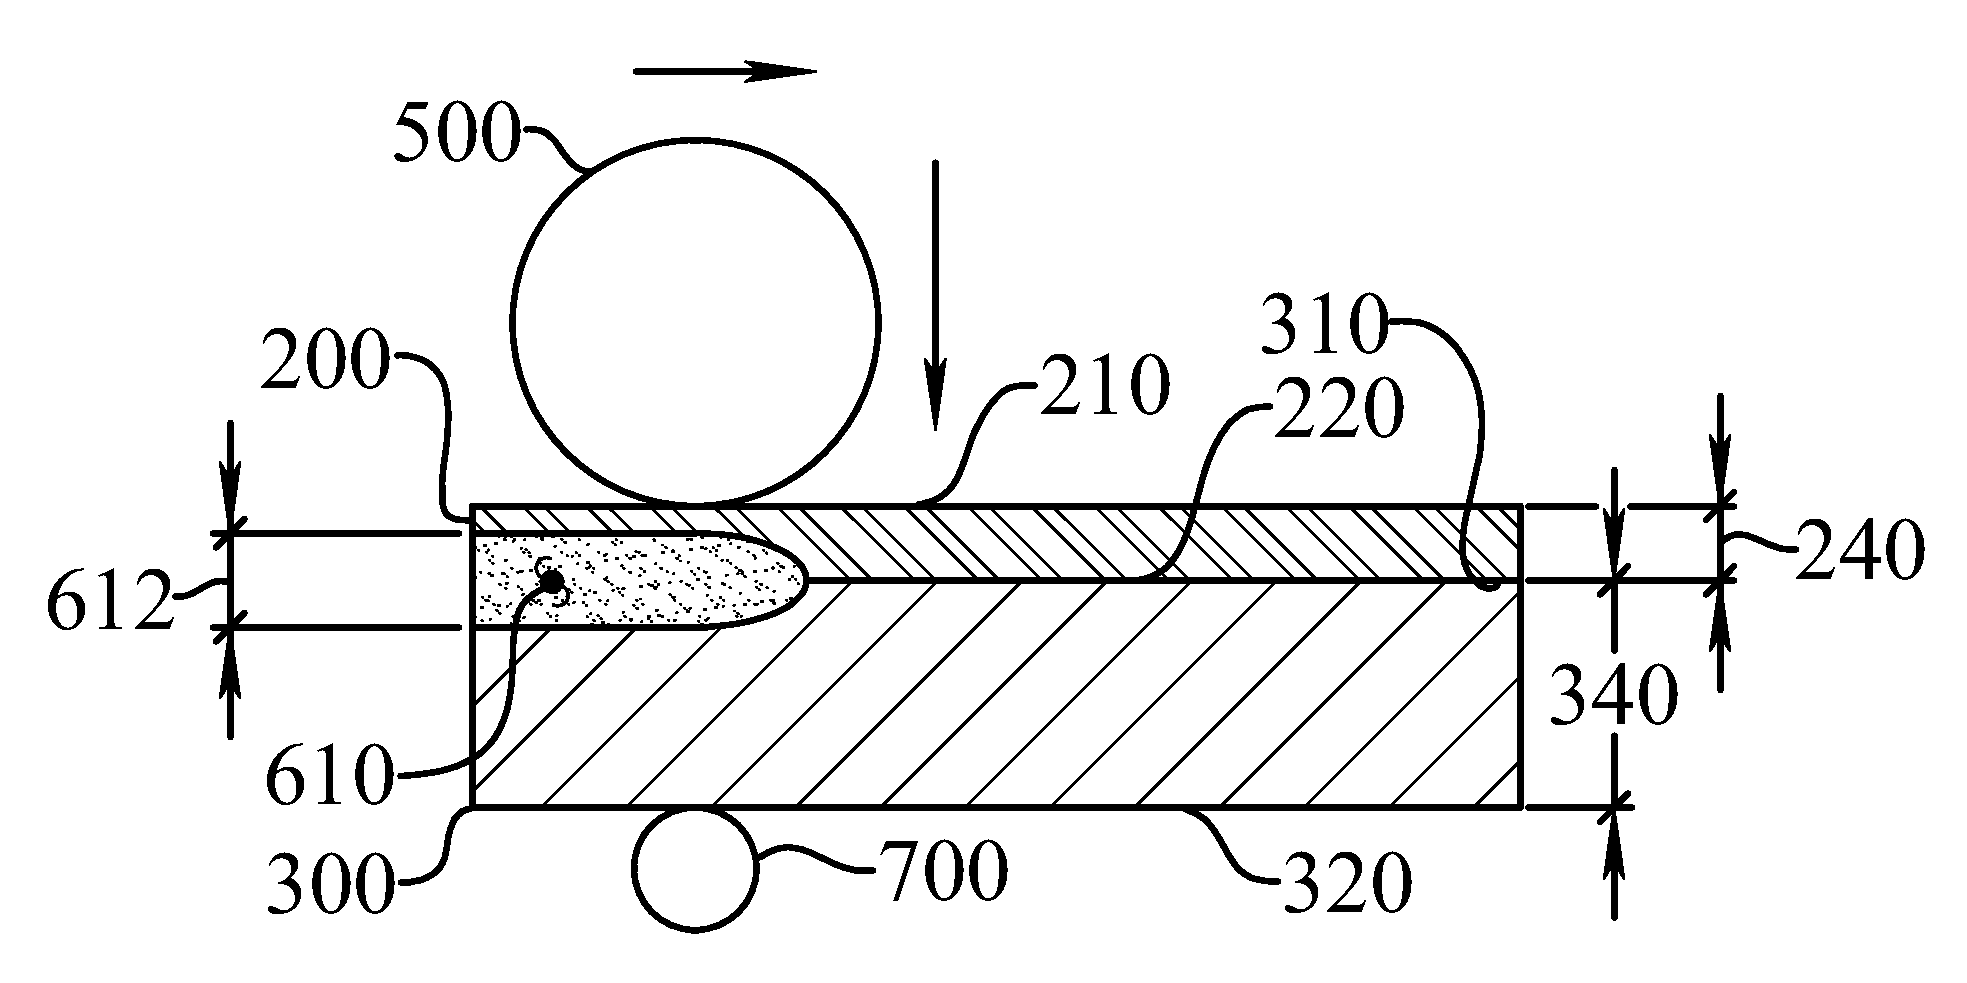 Method of creating a clad structure utilizing a moving resistance energy source